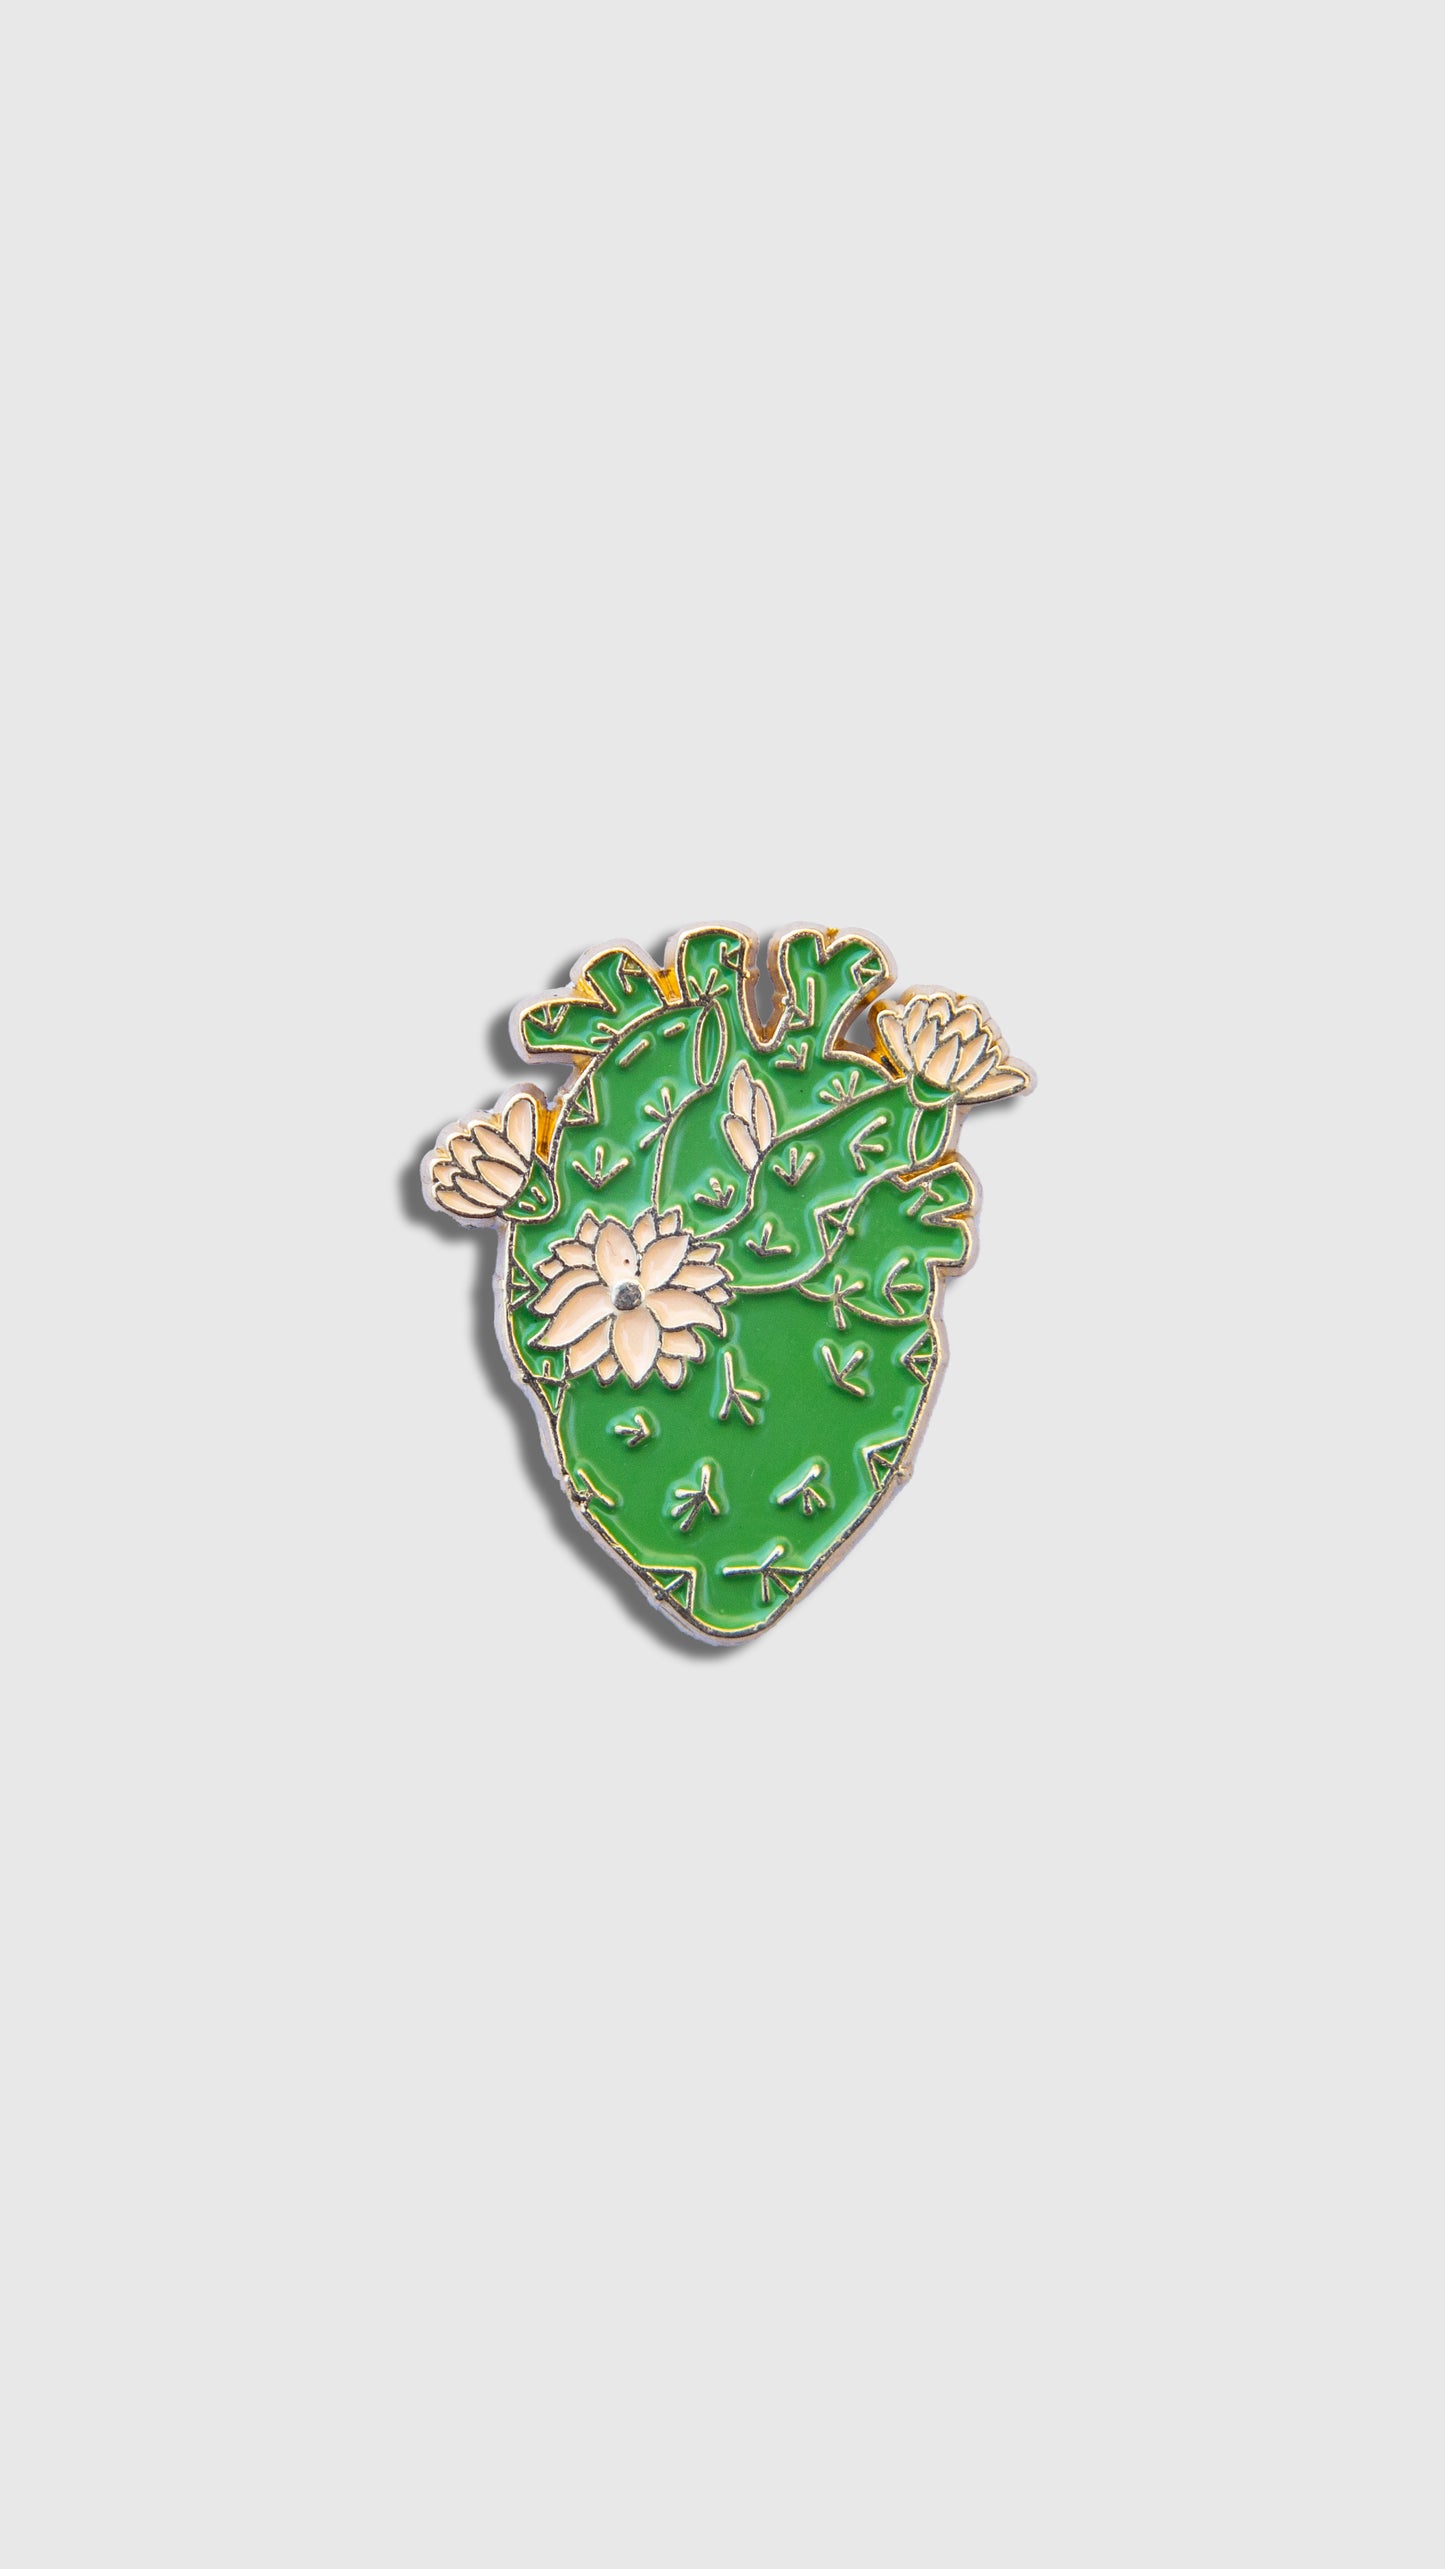 Floral heart pin!